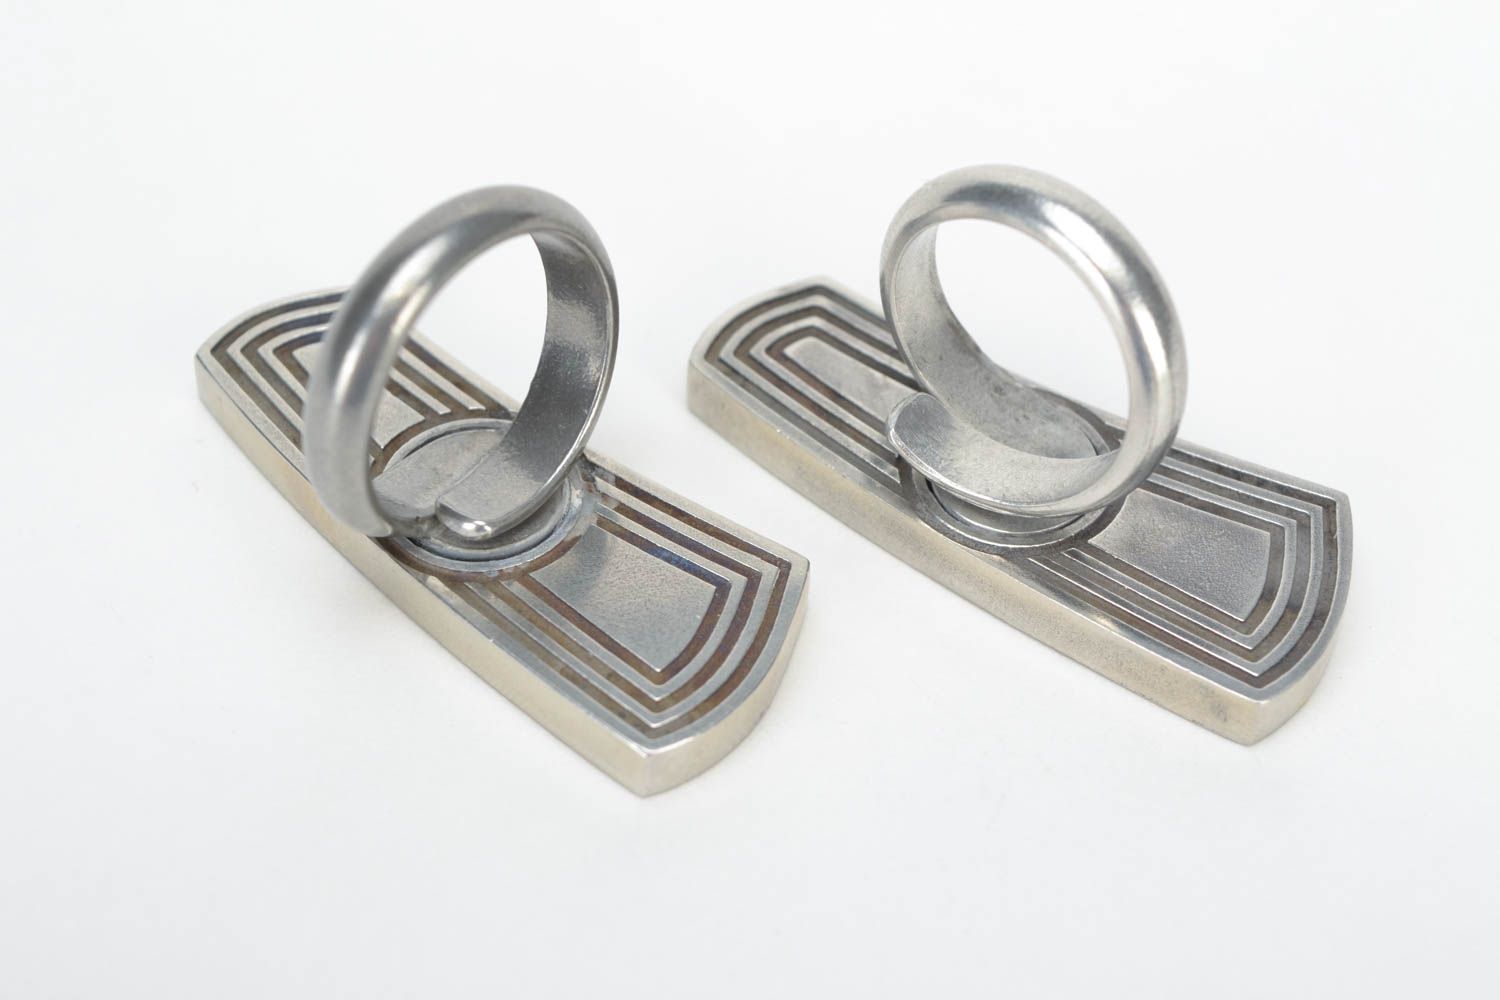 Blanks for creative work metal rings with adjustable sizes set of 2 pieces photo 3